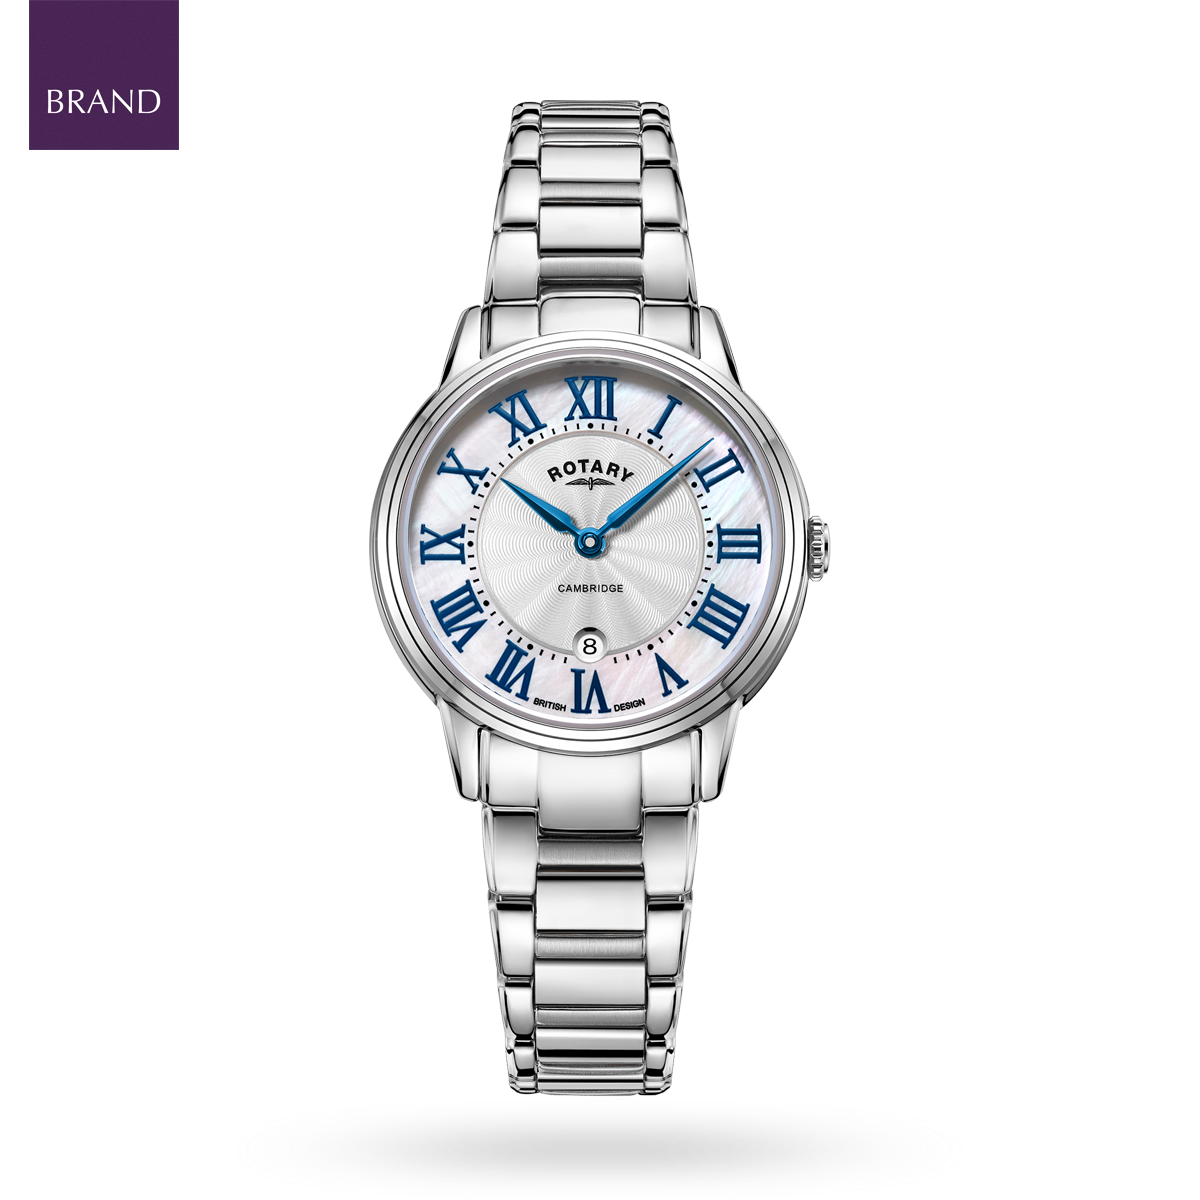 Rotary Cambridge Watch, Mother of Pearl Round Dial with Stainless Steel Bracelet - LB05425/07